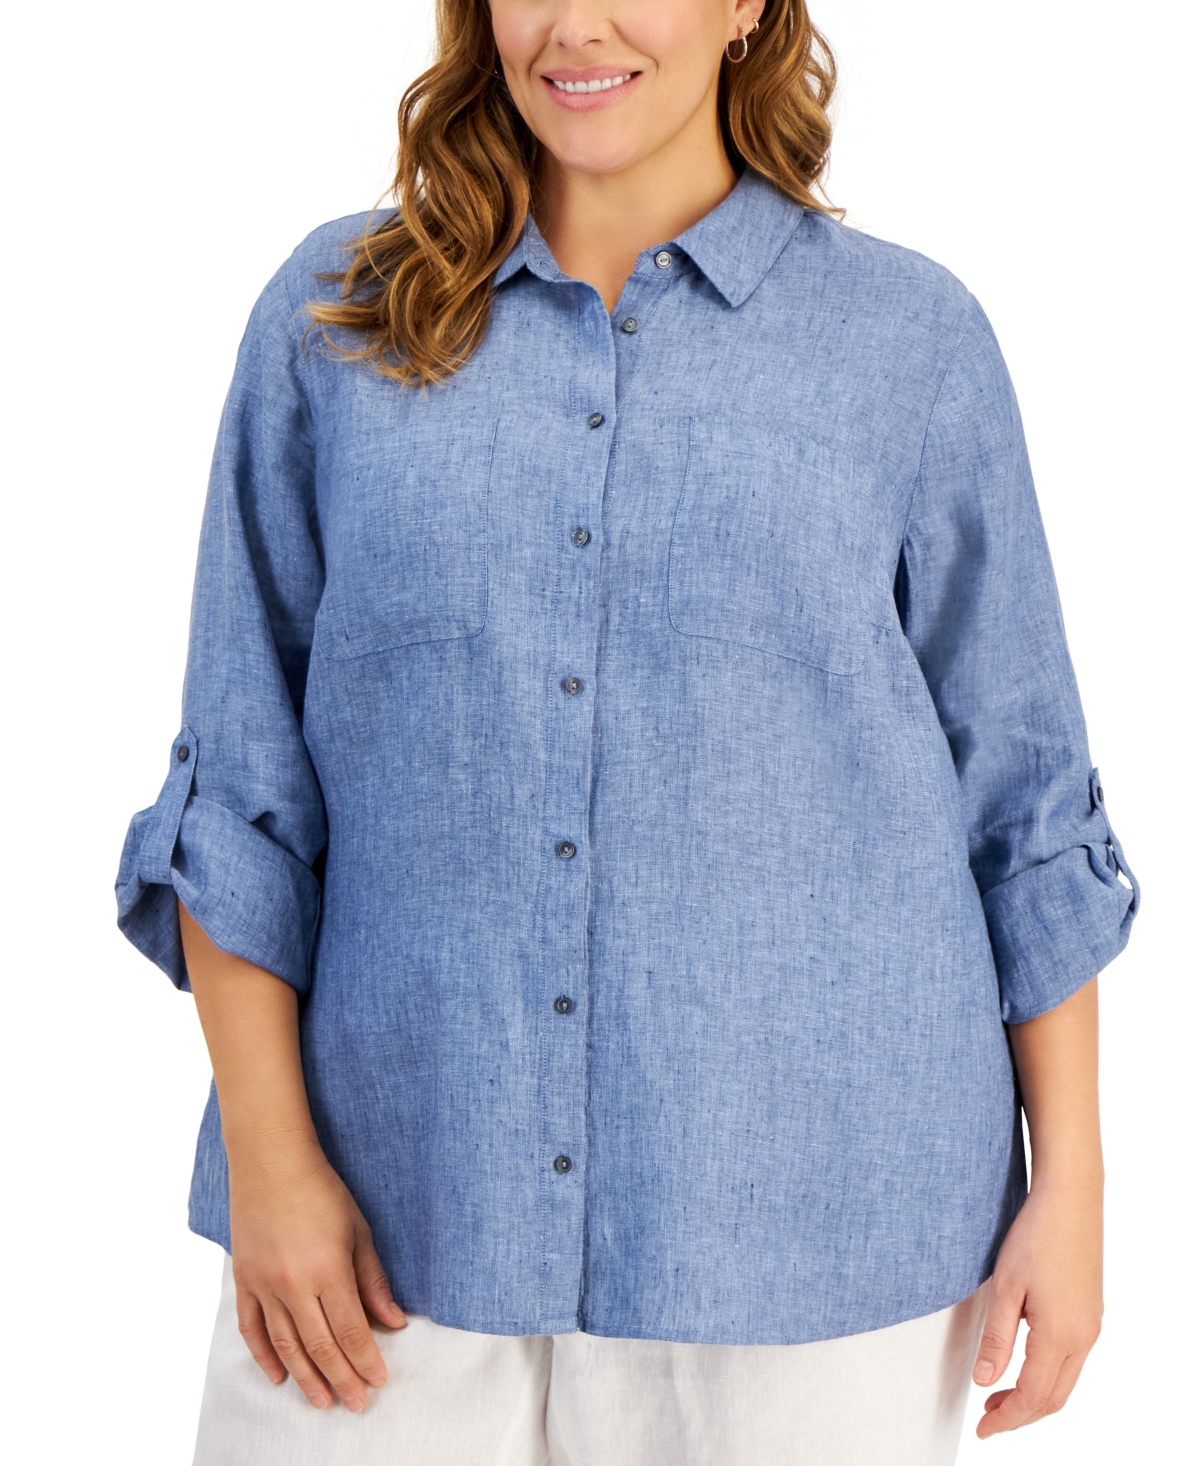 Plus Size 100% Linen Roll-Tab Shirt, Created for Macy's - BLue Ocean